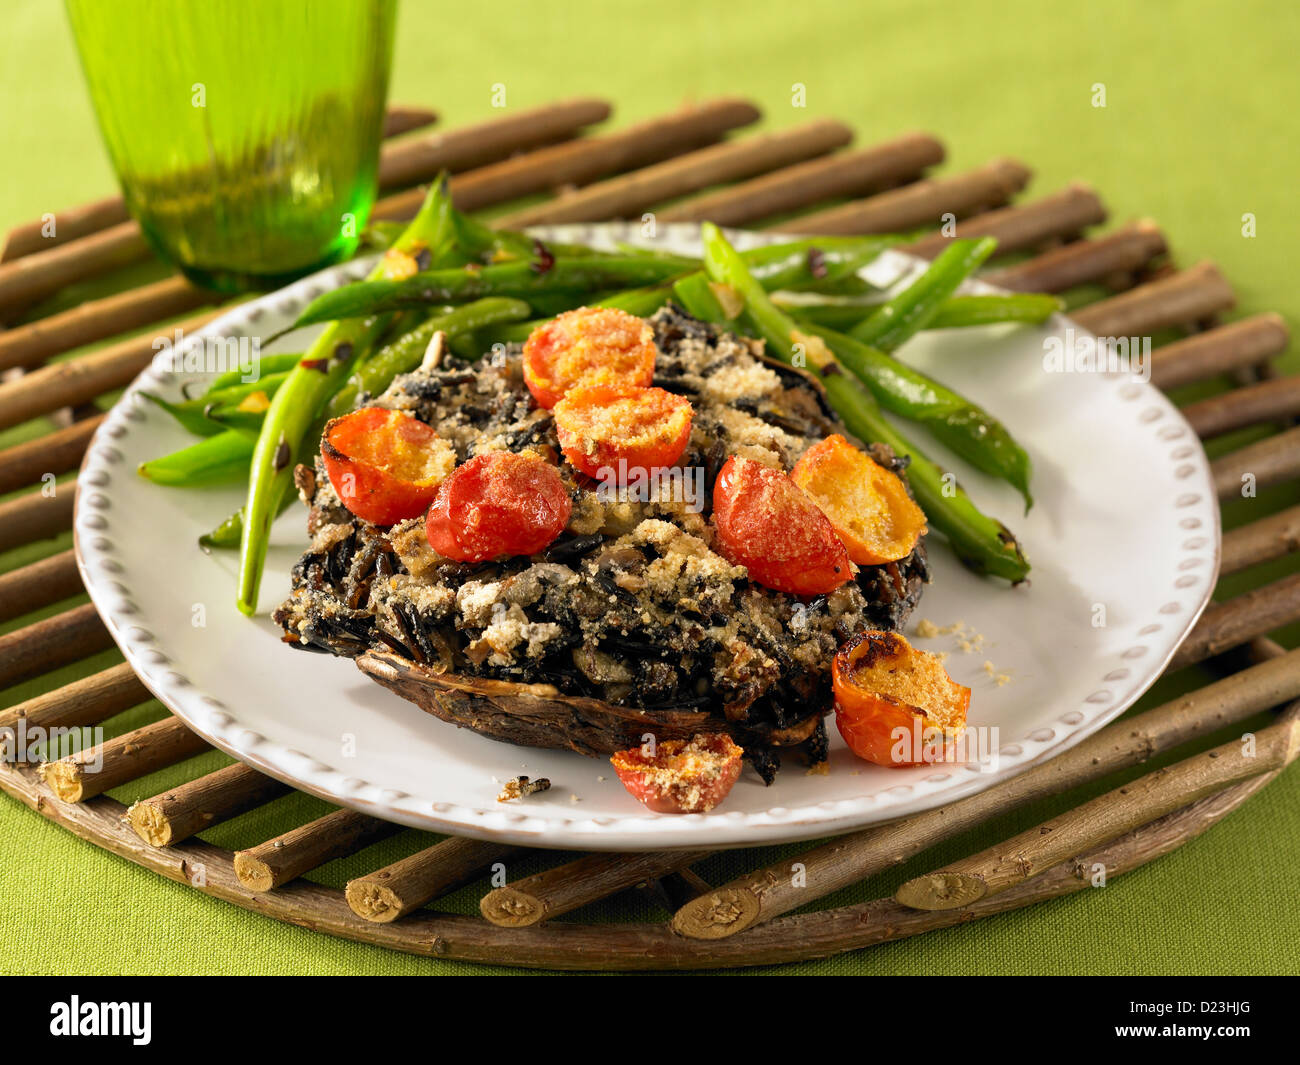 Stuffed mushrooms with grilled tomatoes and green beans Stock Photo